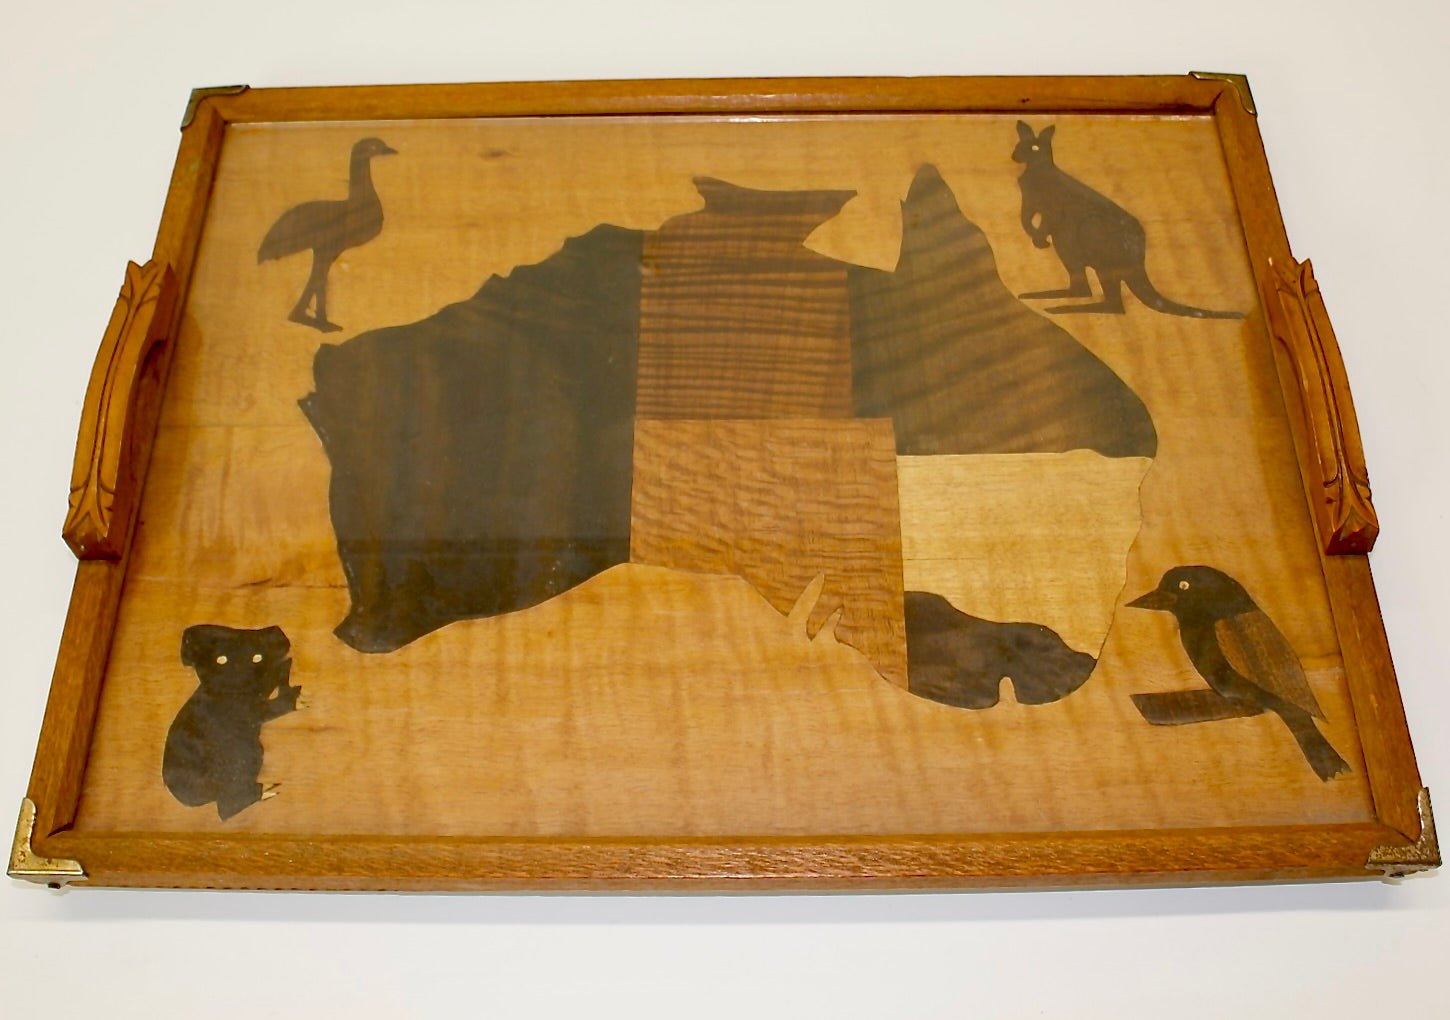 Vintage Serving Tray with an Inlay of the Country of Australian its animals